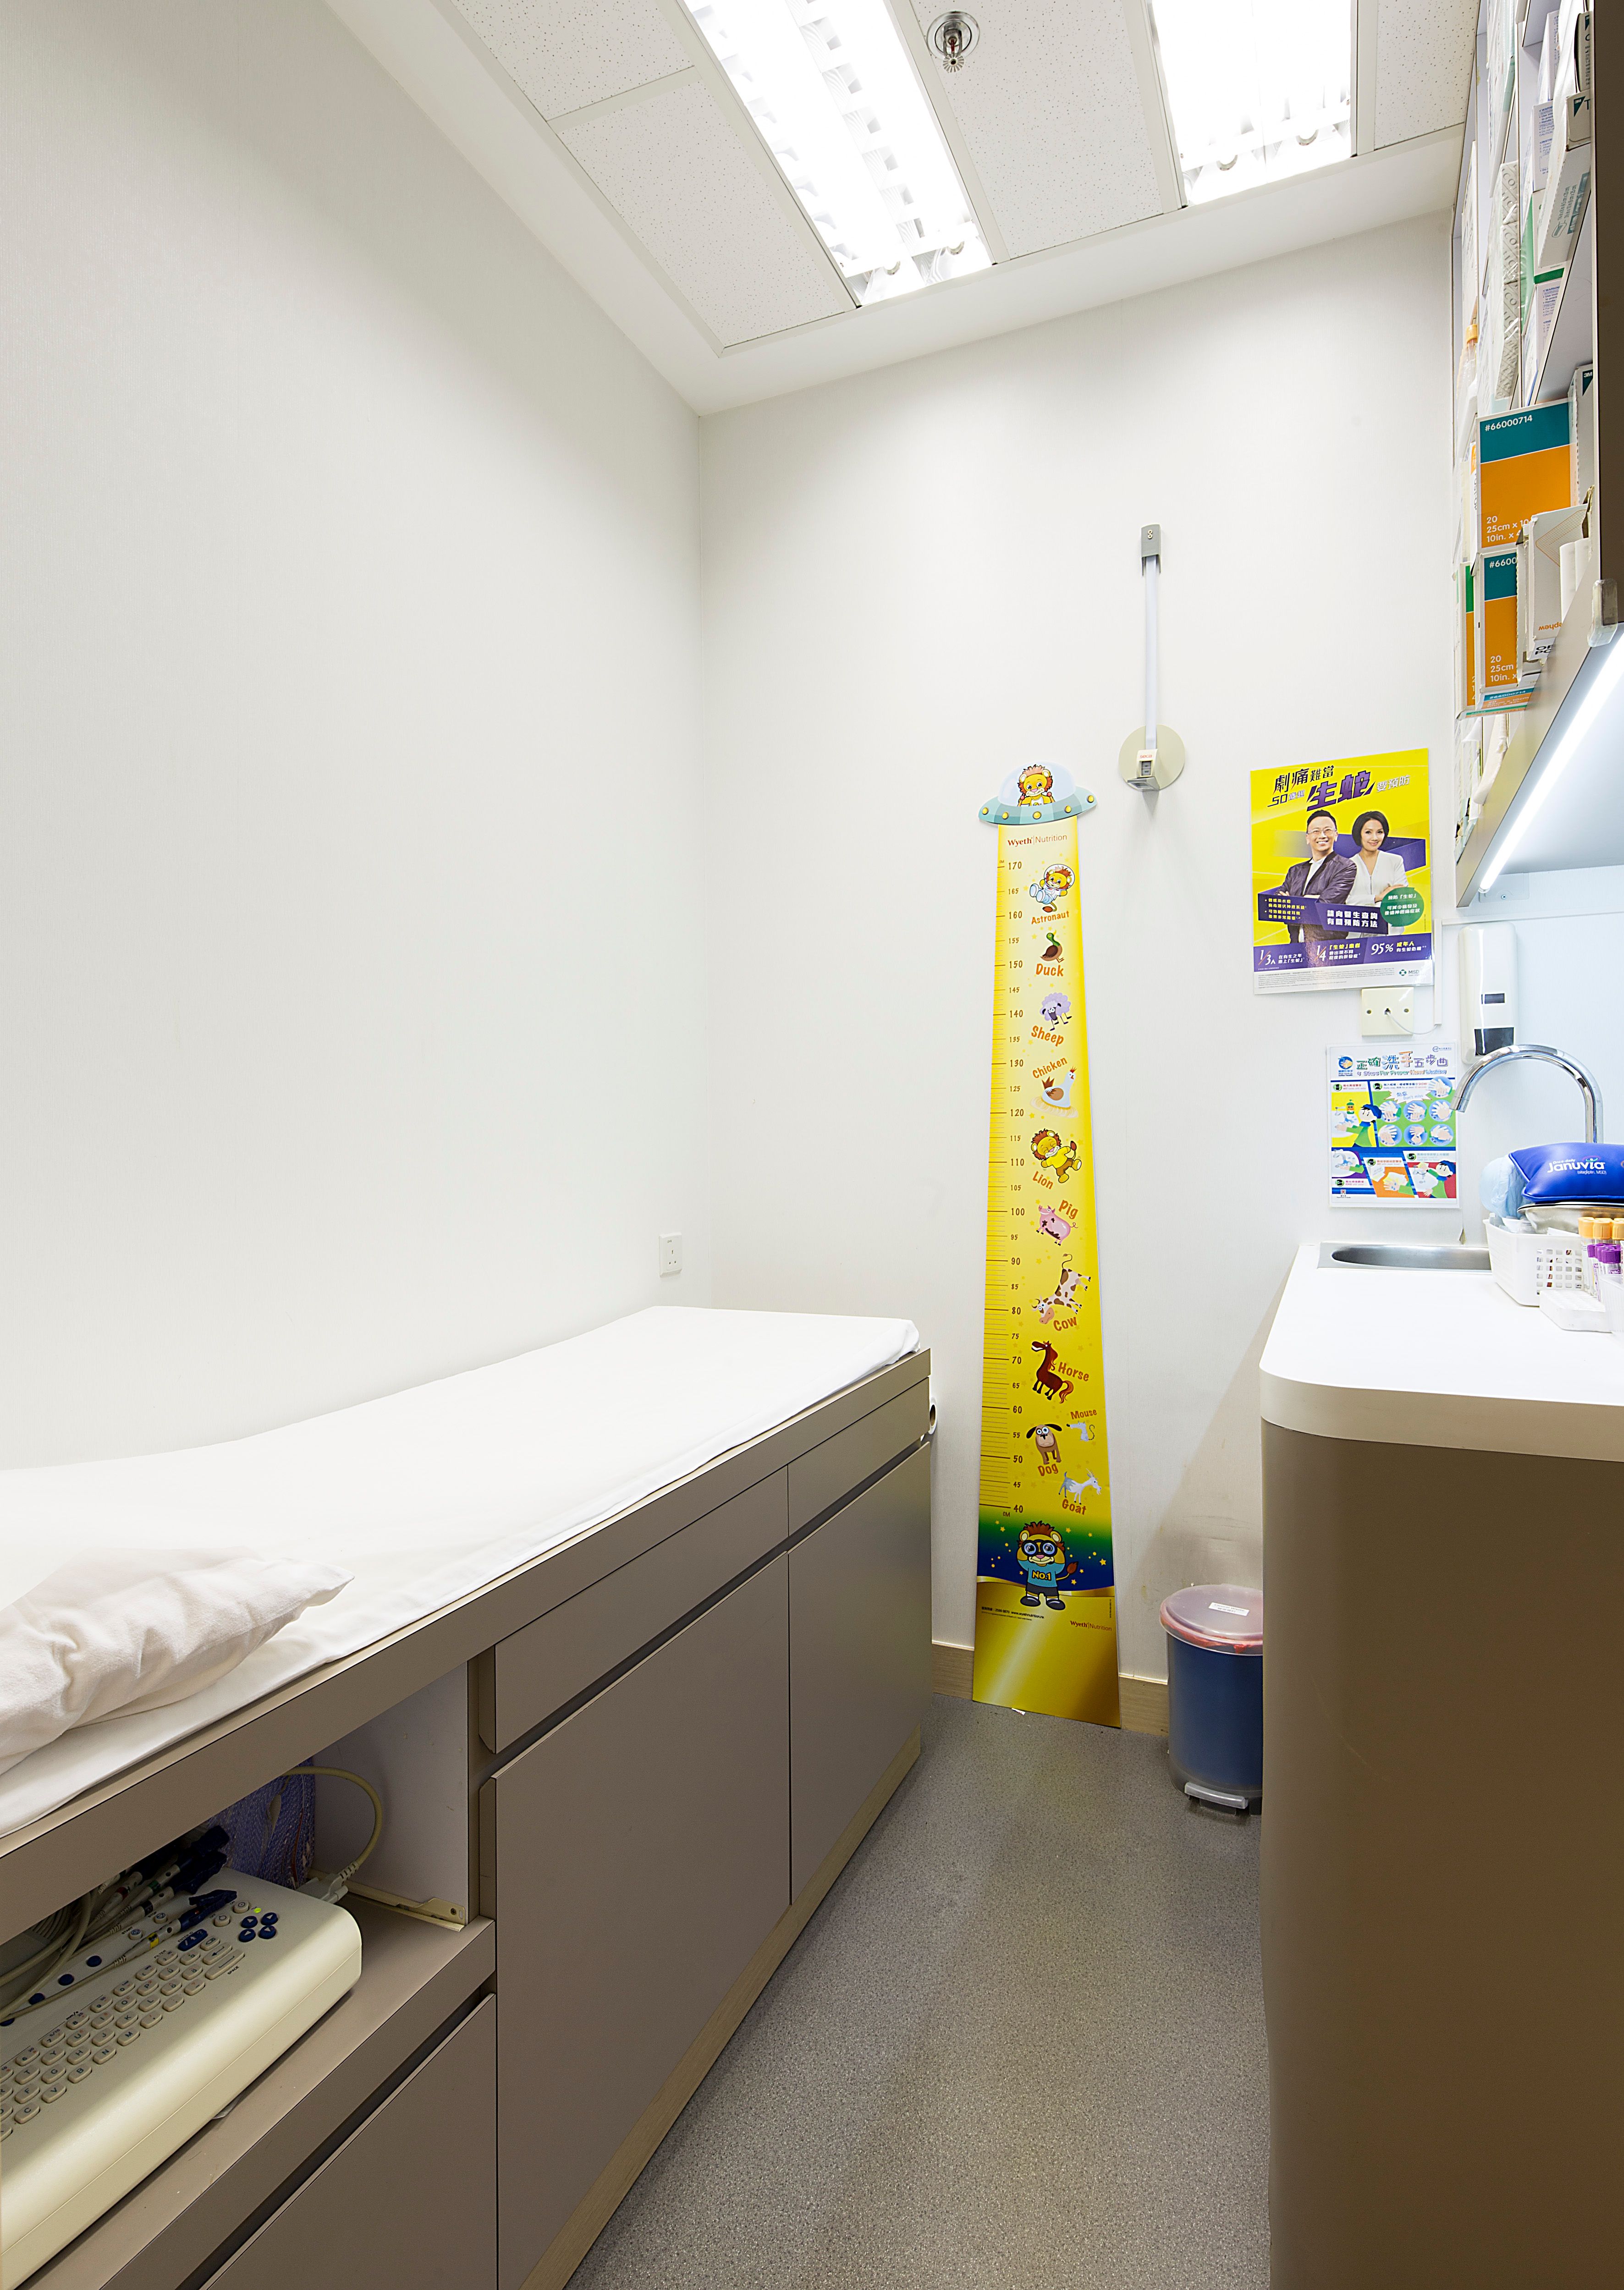 Examination room with patient bed and wall growth chart